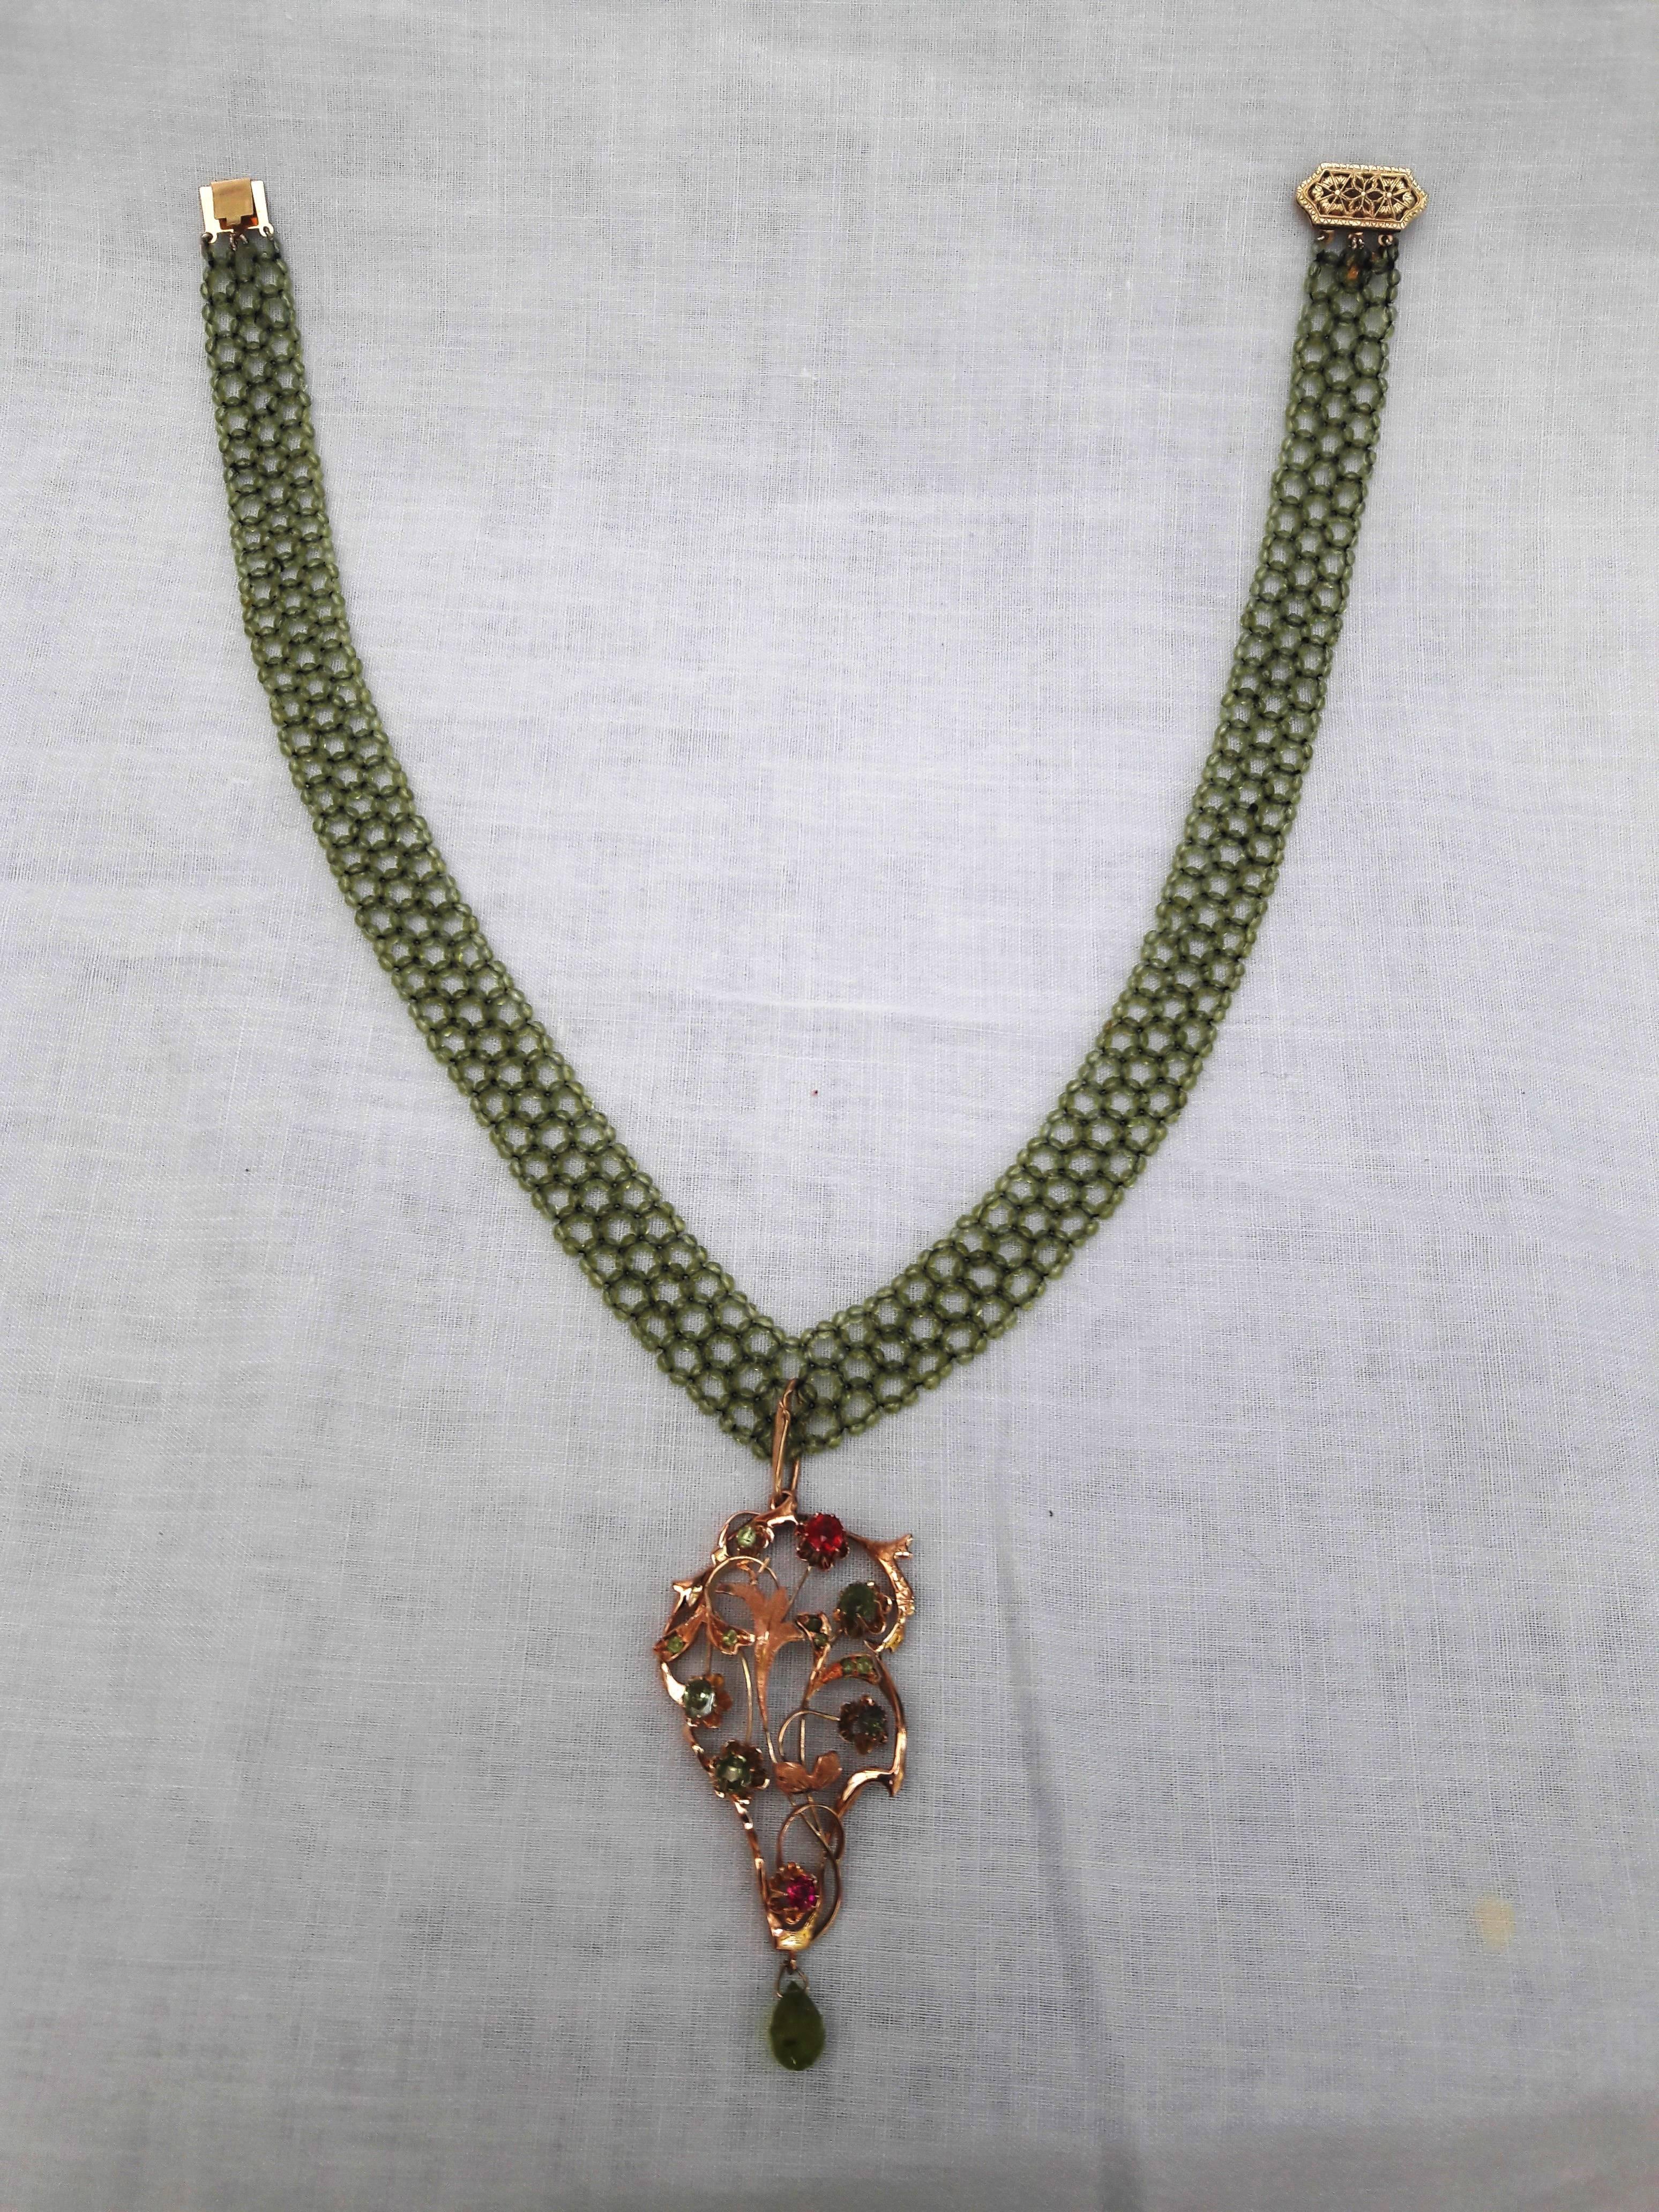 Women's Woven Peridot Bead Necklace with Brooch of Ruby Peridot and Gold